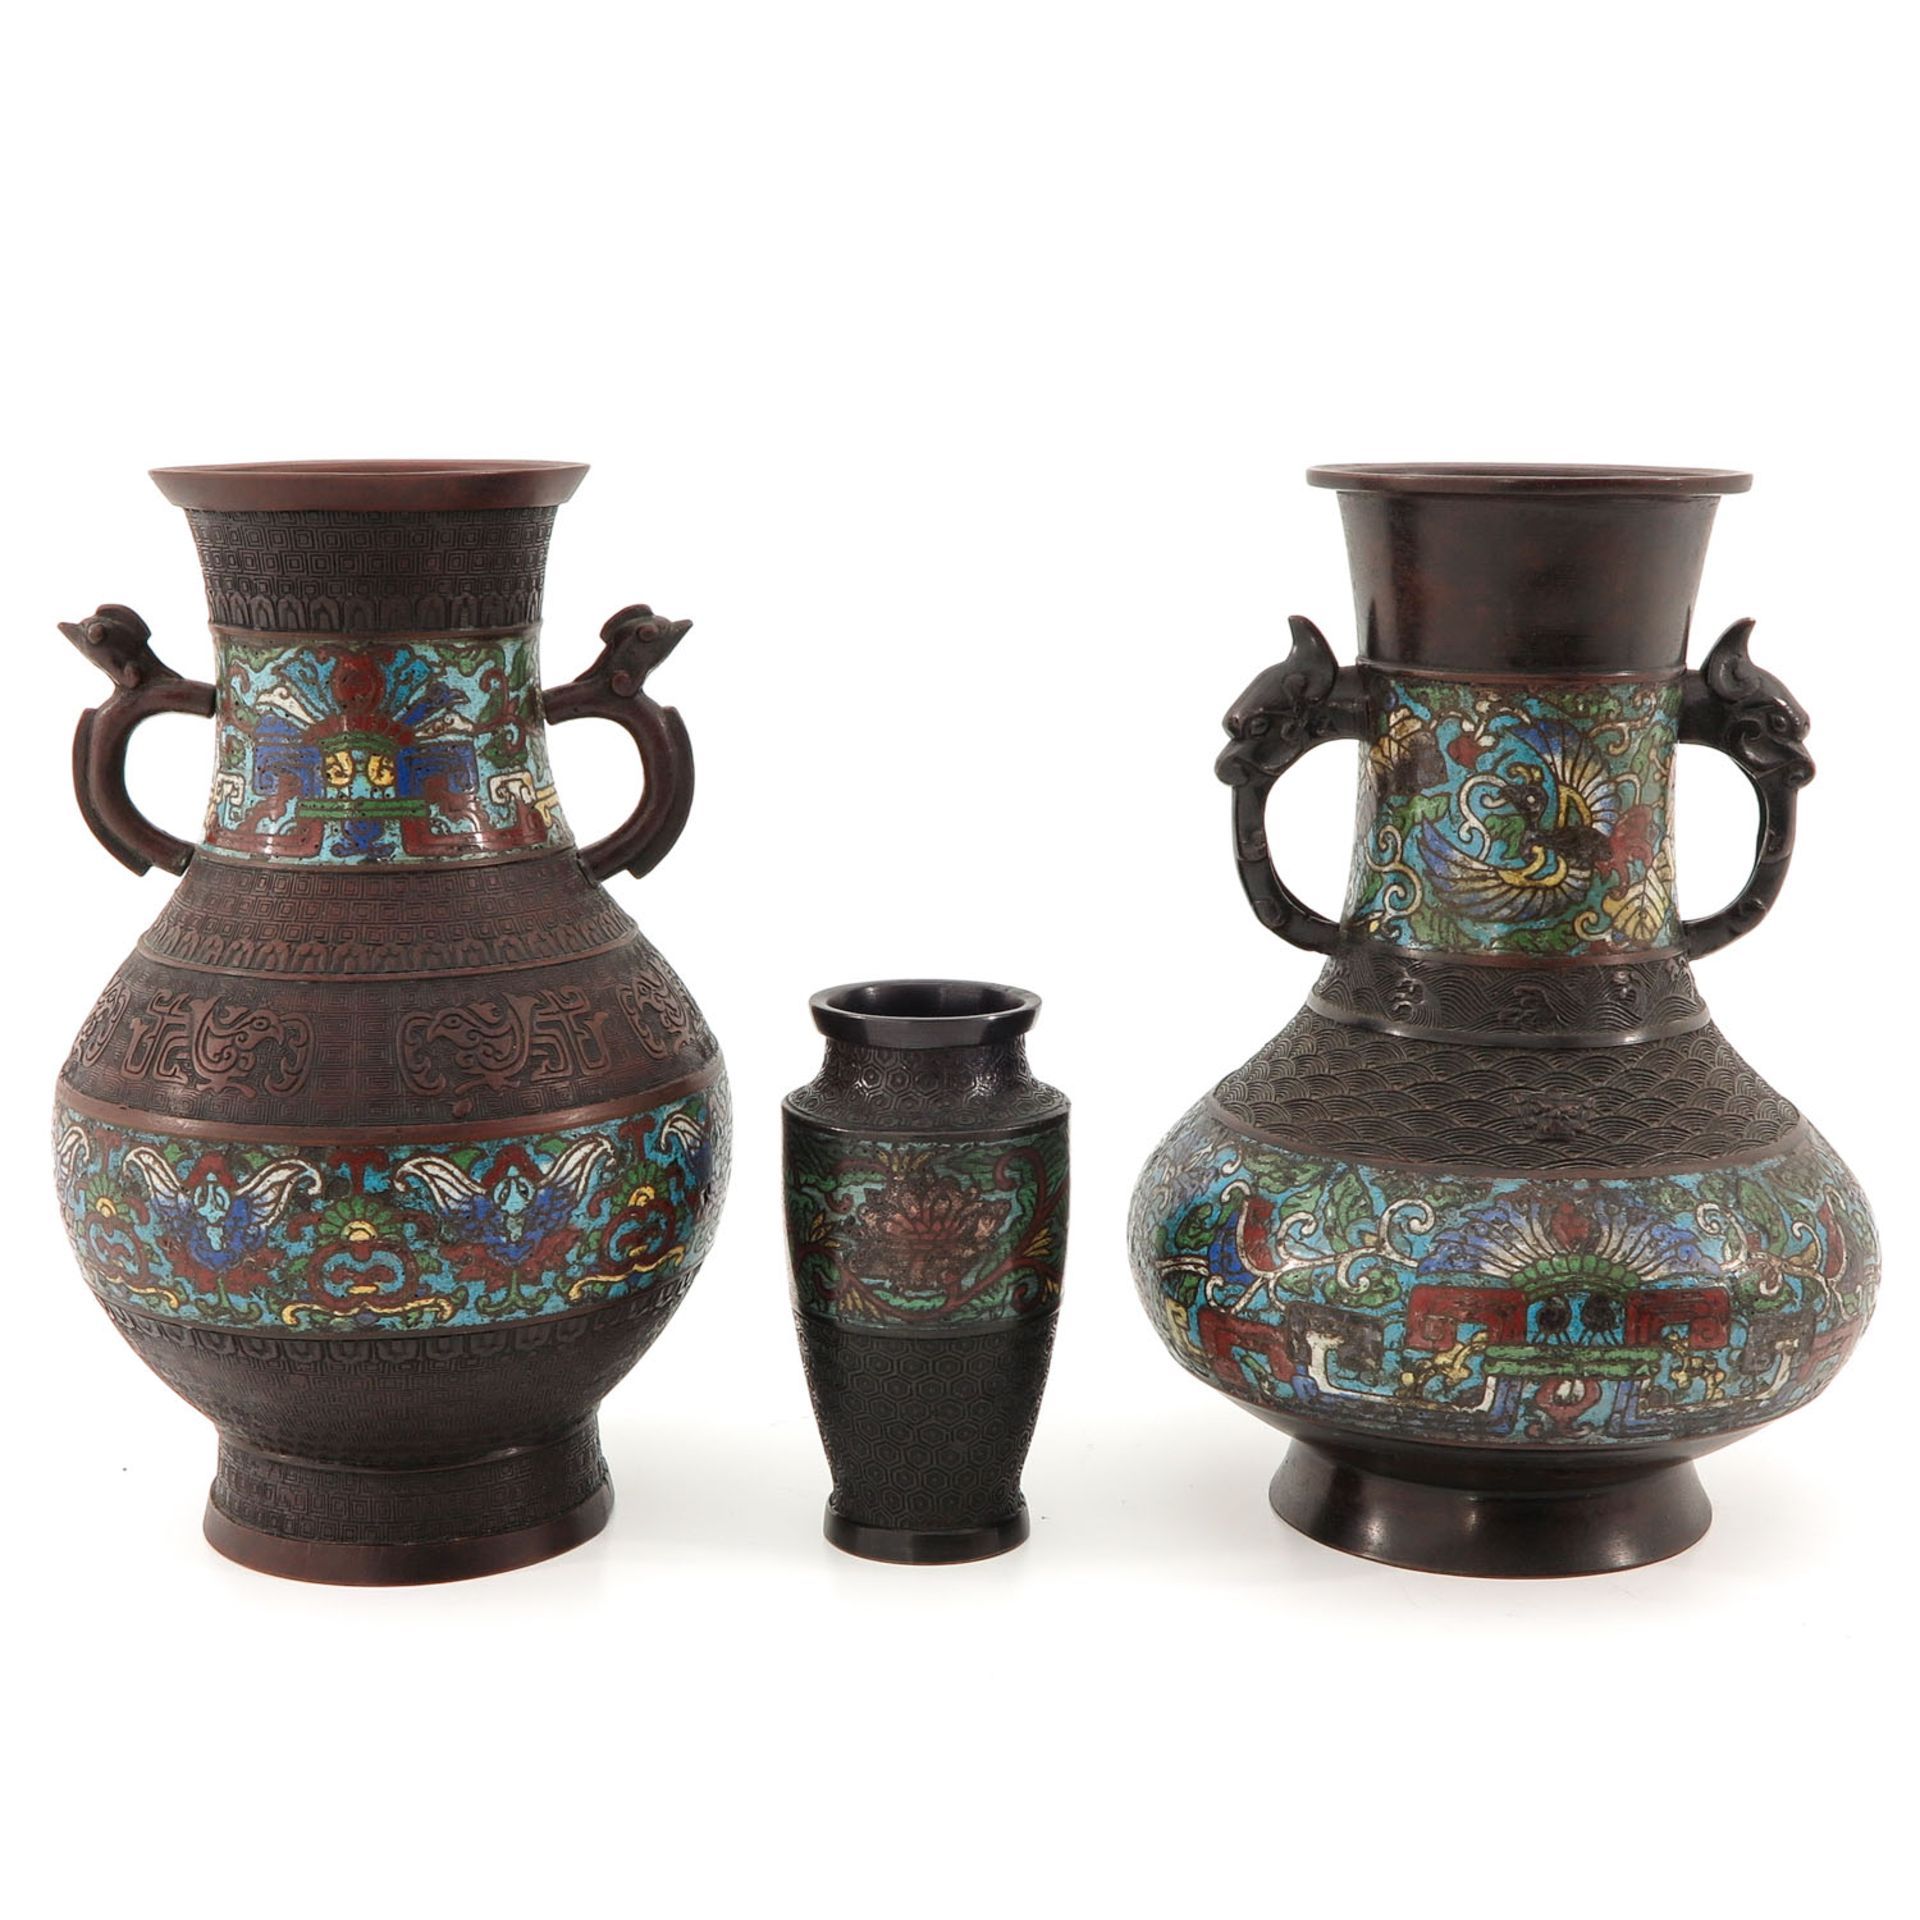 A Collection of 3 Cloisonne Vases